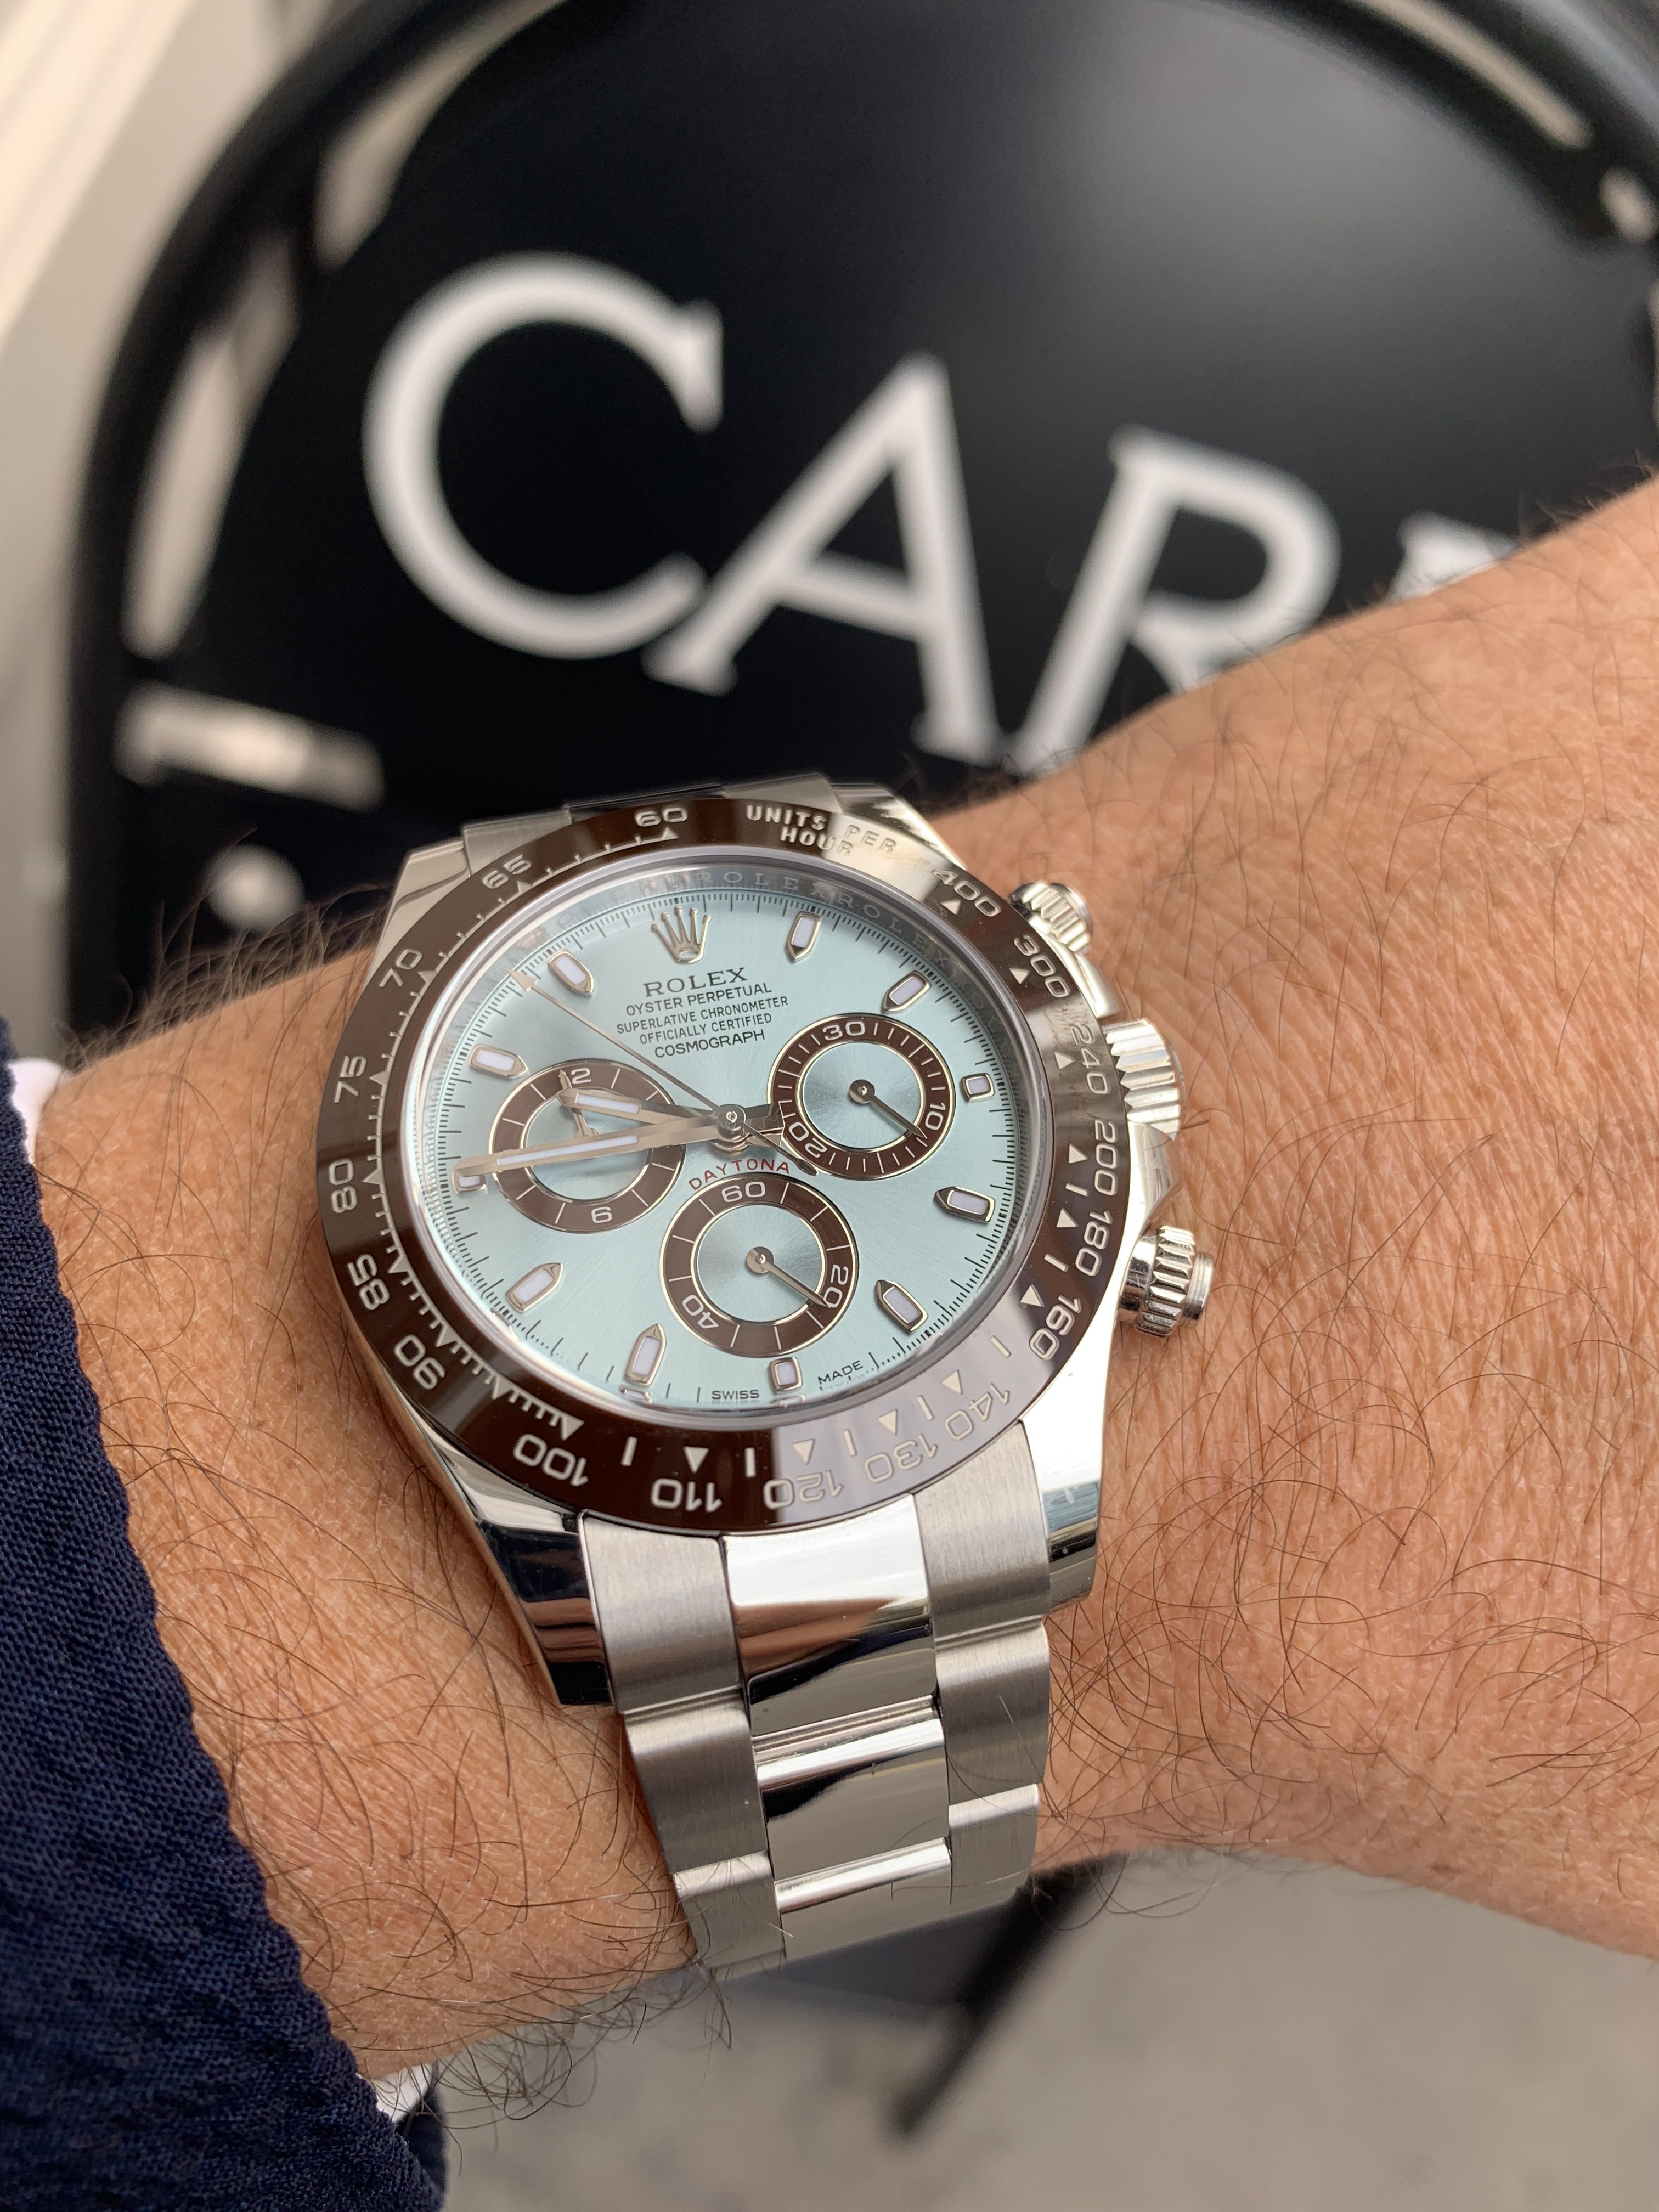 Rolex Daytona in Platinum with the stunning ice blue dial 116506 Carr